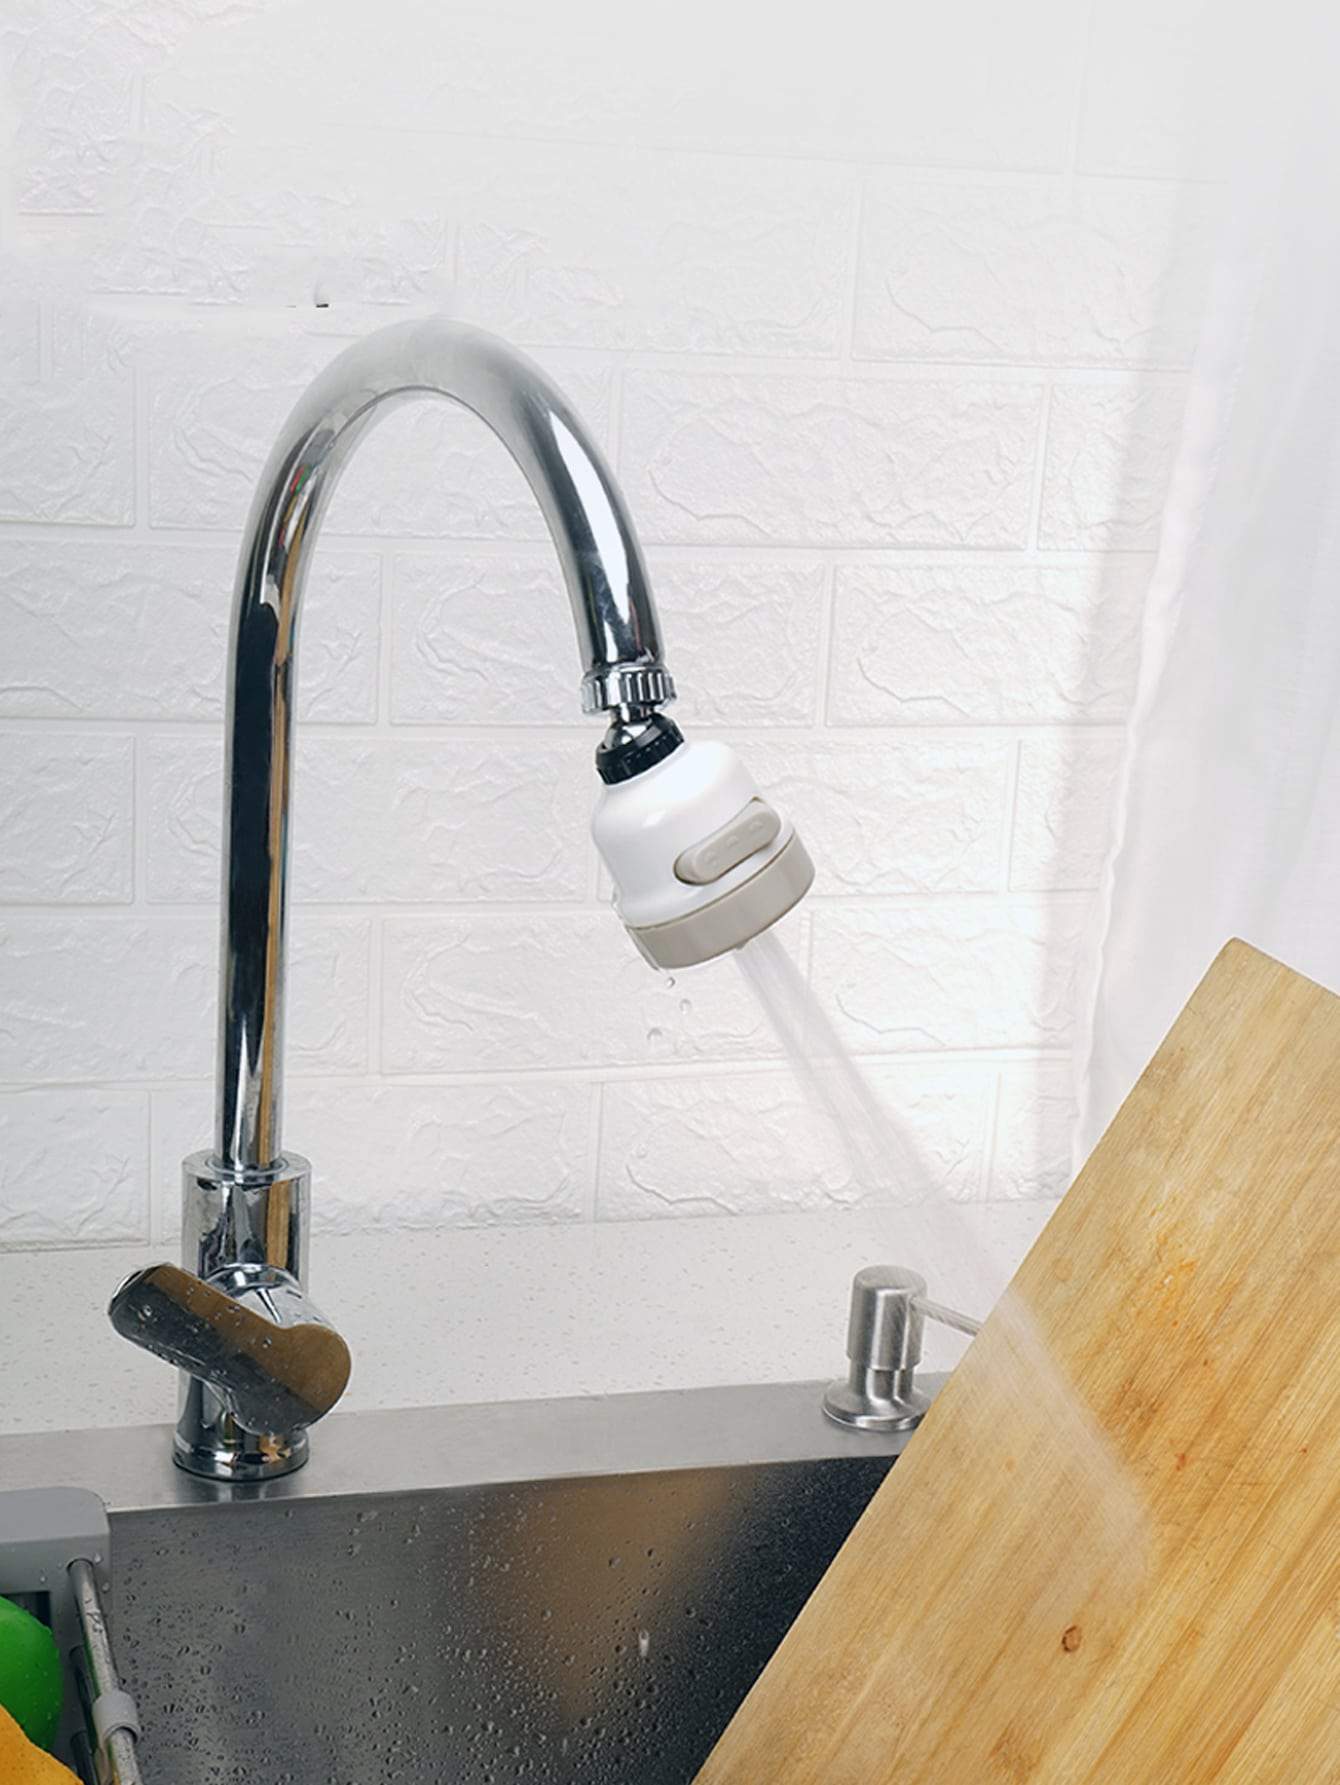 1pc Stainless Steel White Adjustable Faucet Filter